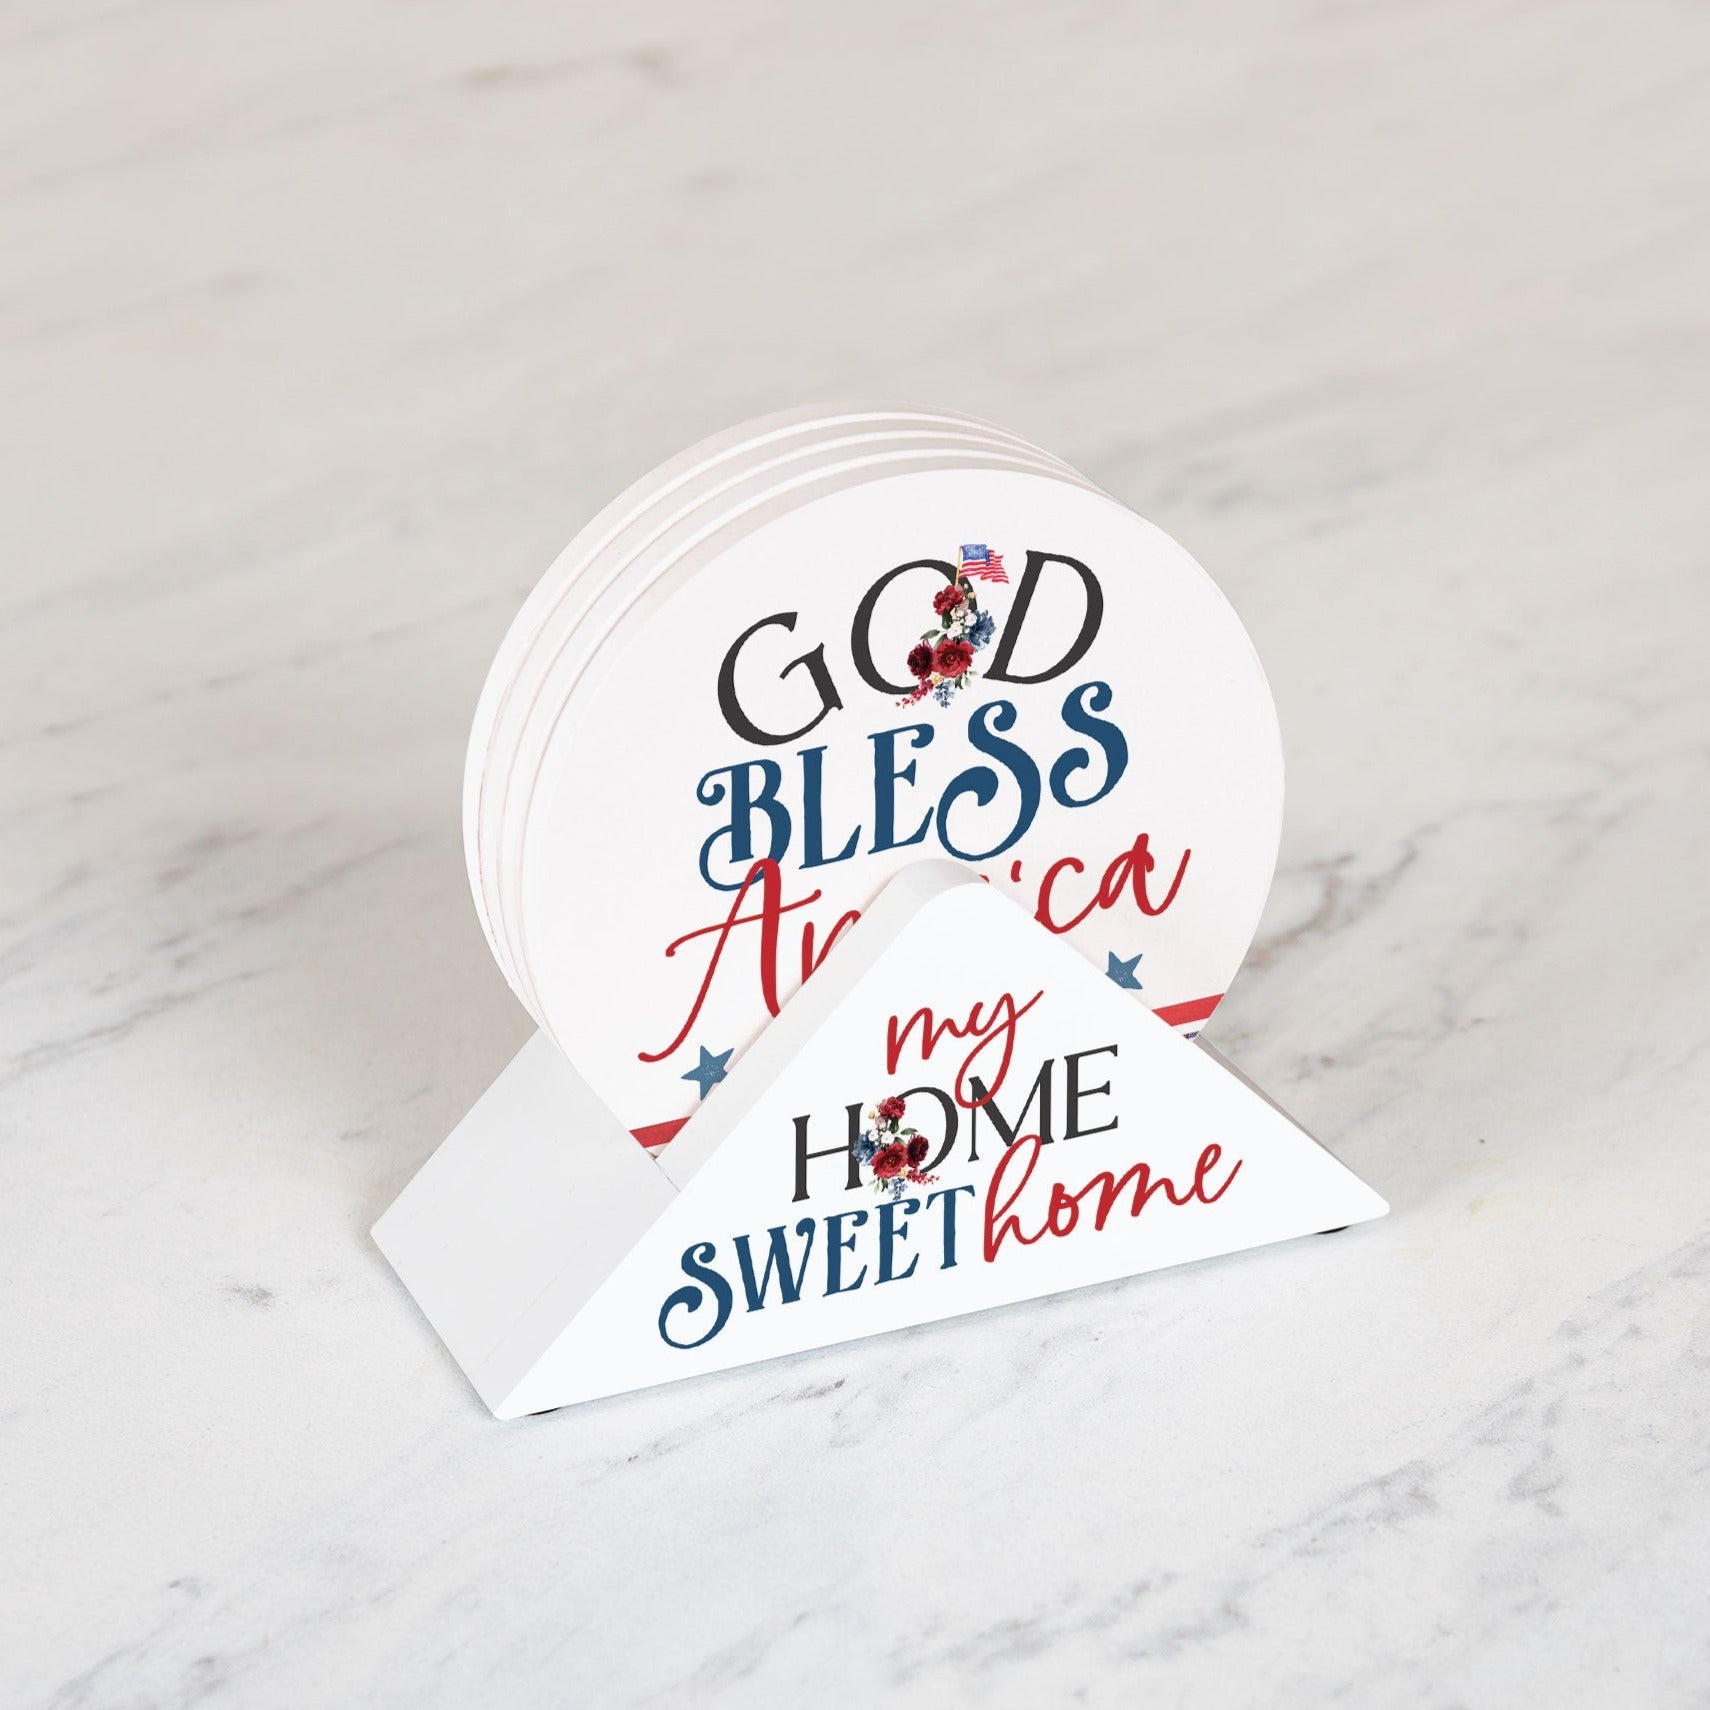 **My Home Sweet Home: God Bless America Round Coaster Set